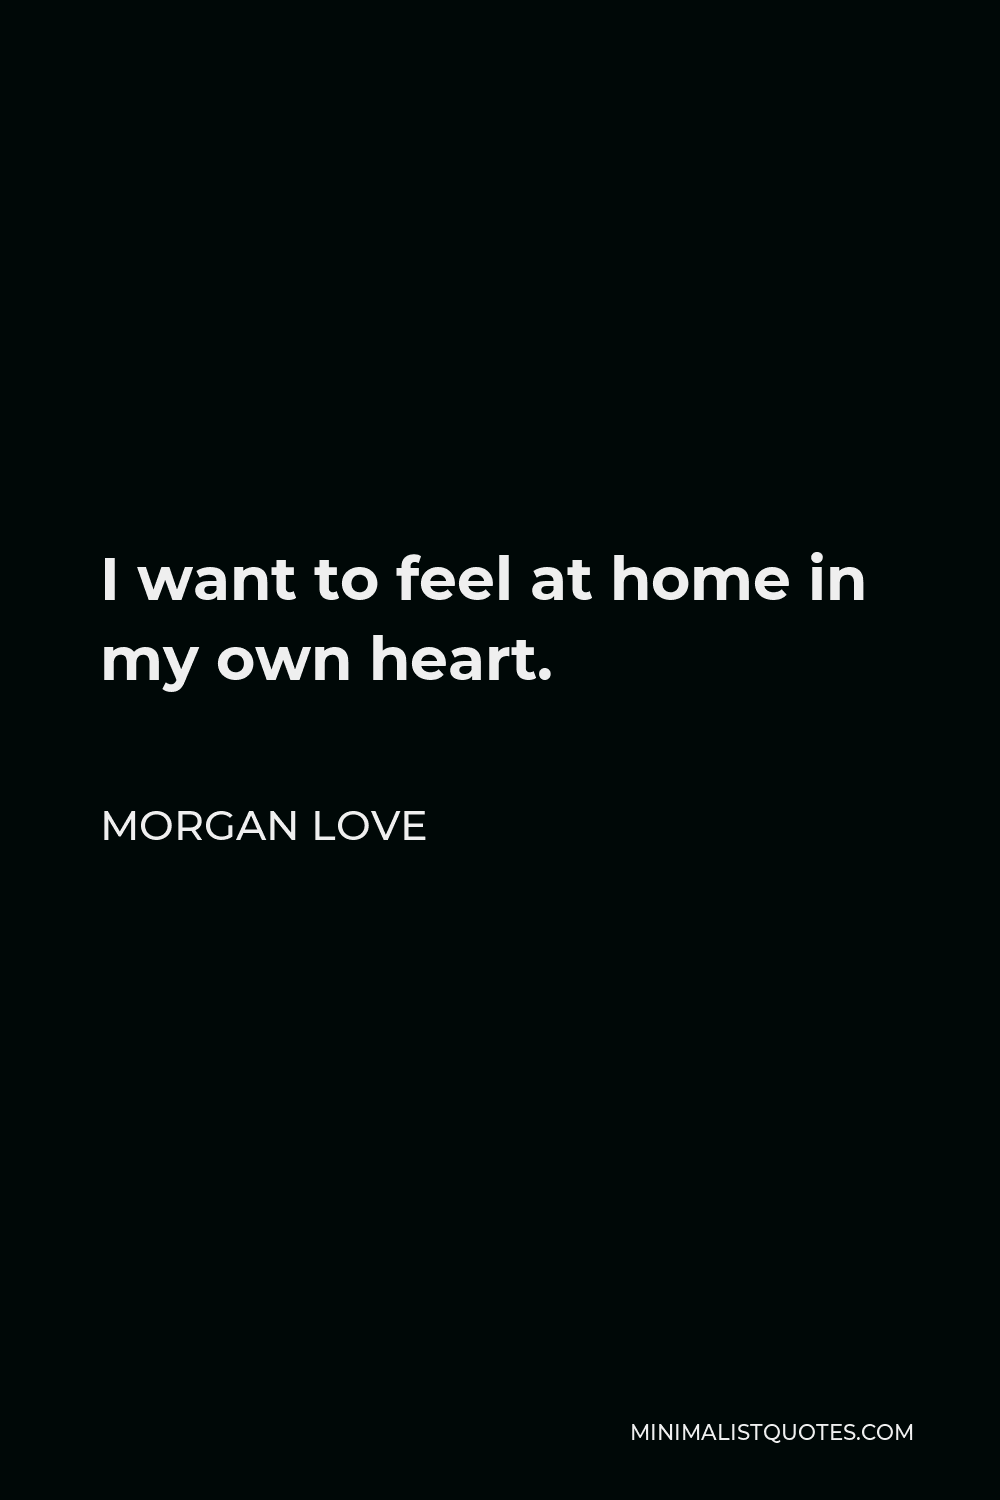 Morgan Love Quote - I want to feel at home in my own heart.